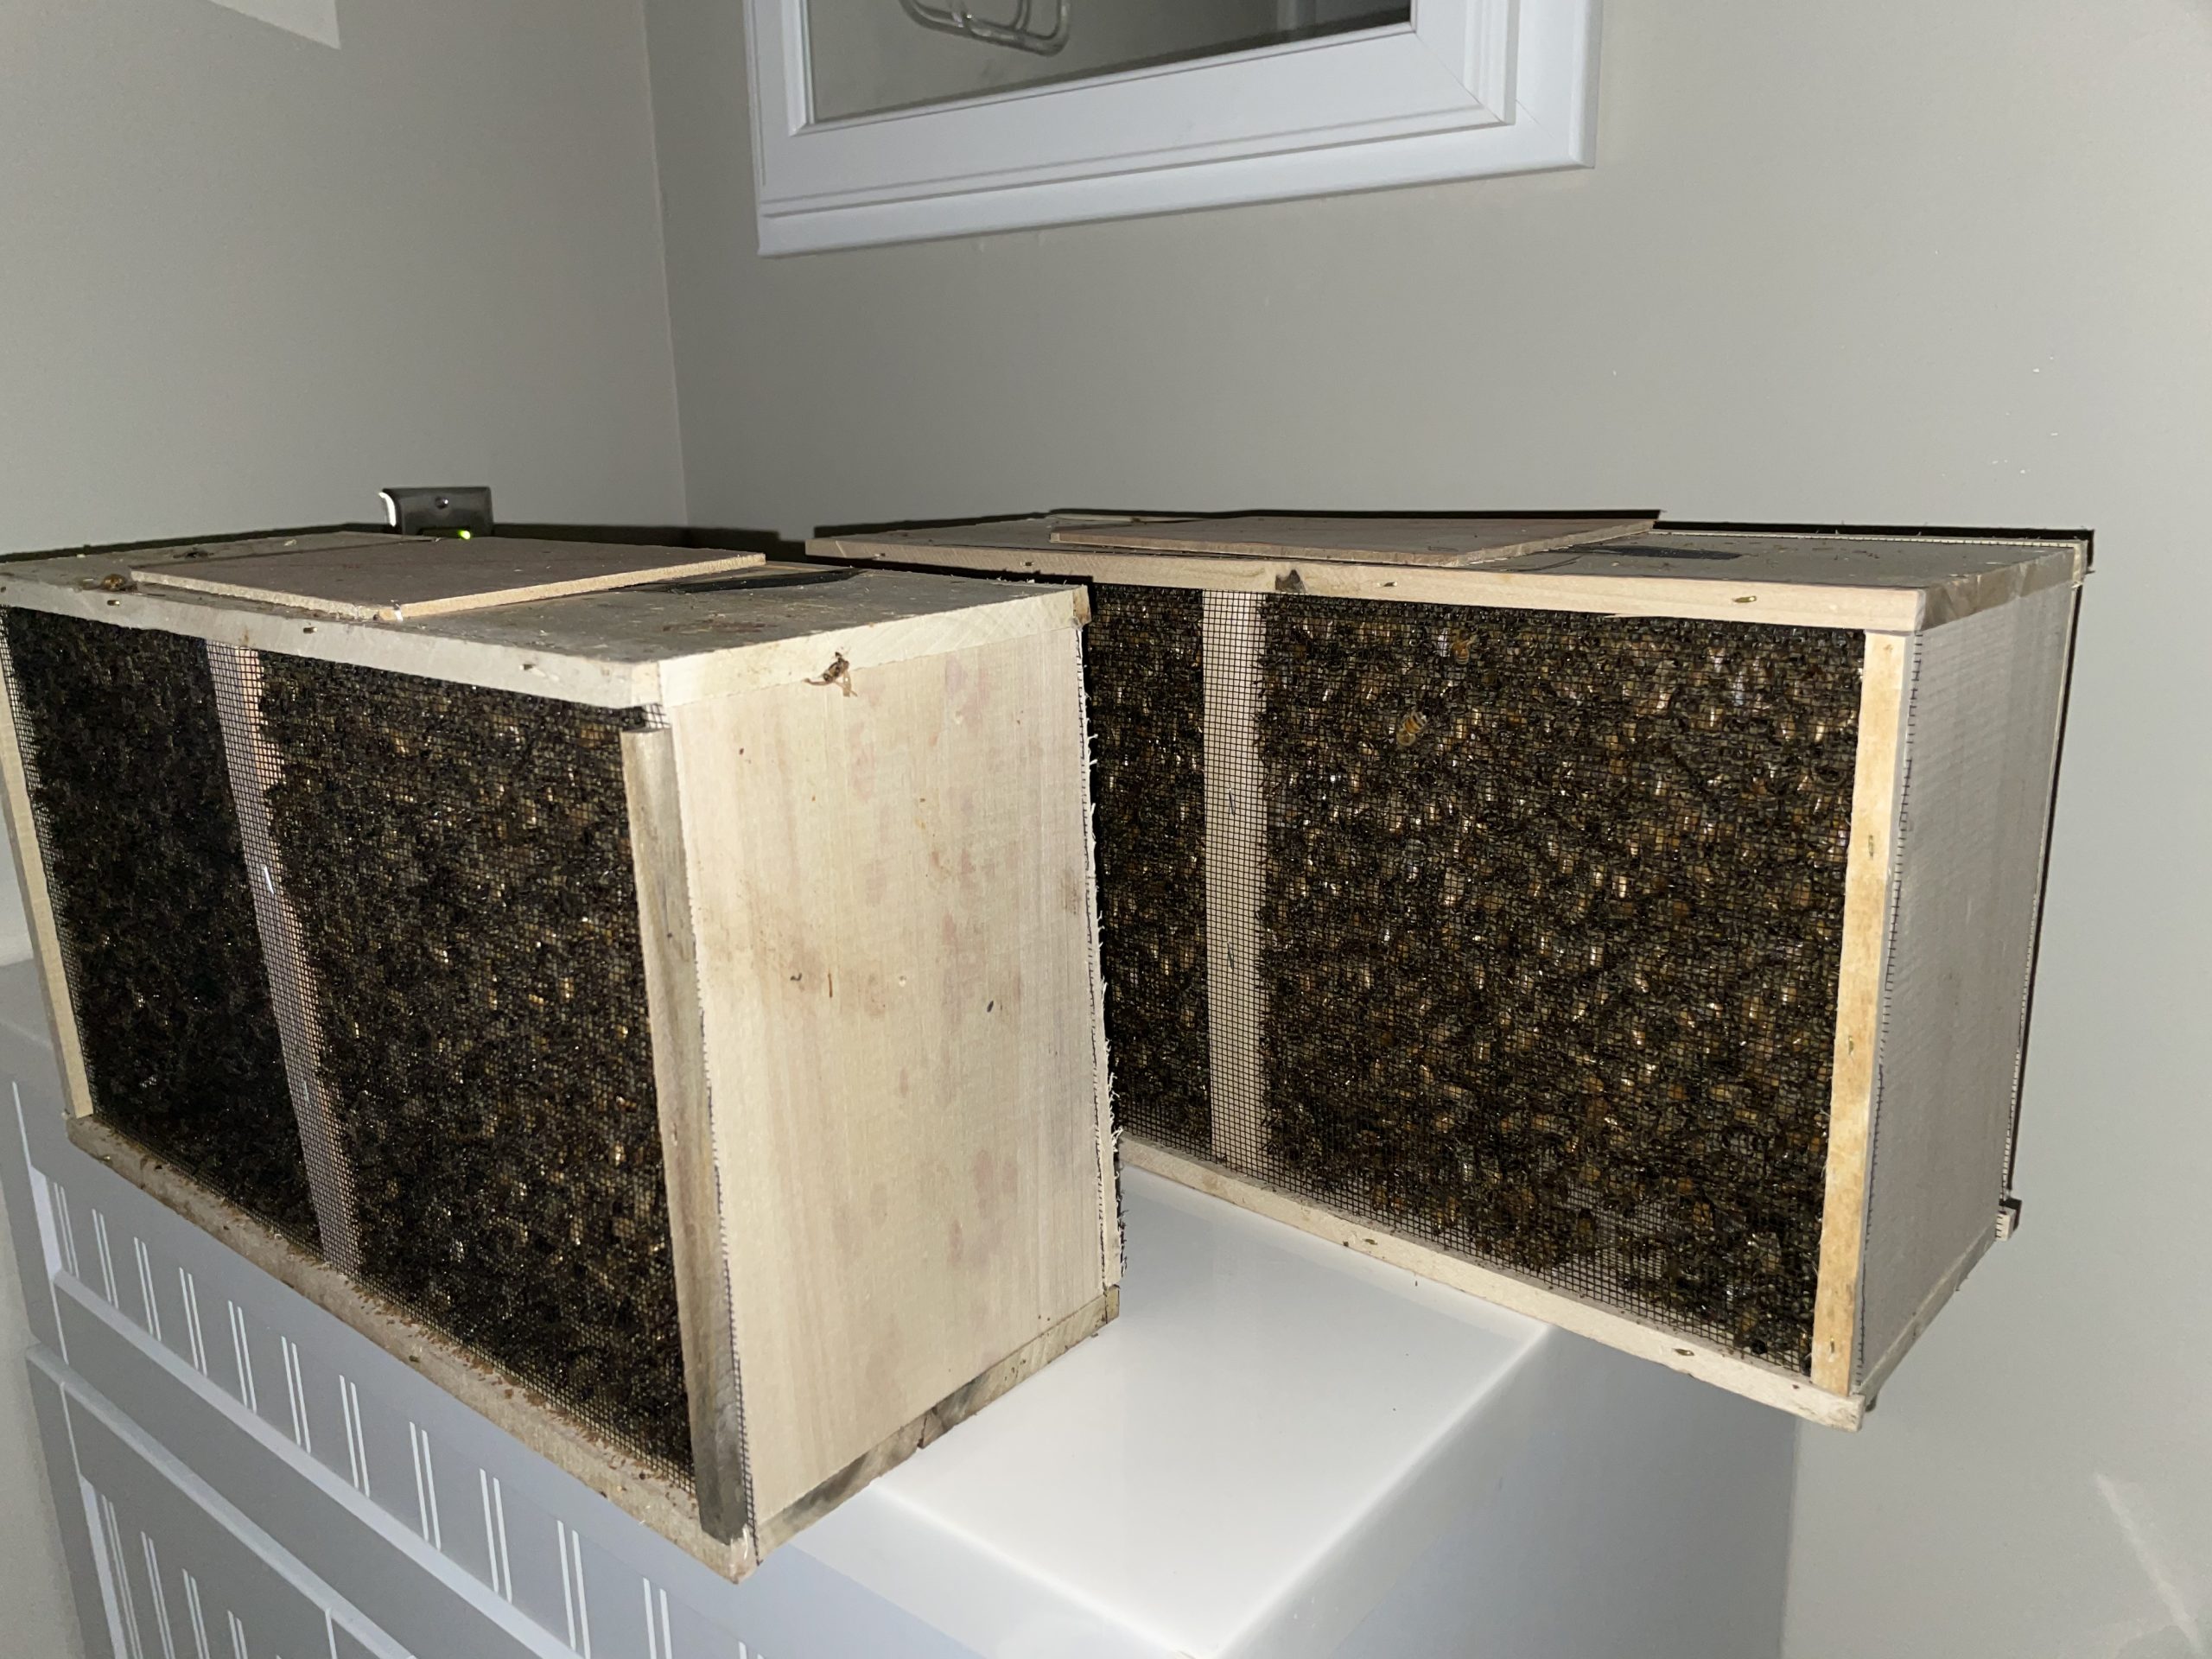 Replacement bees for Spring 2021